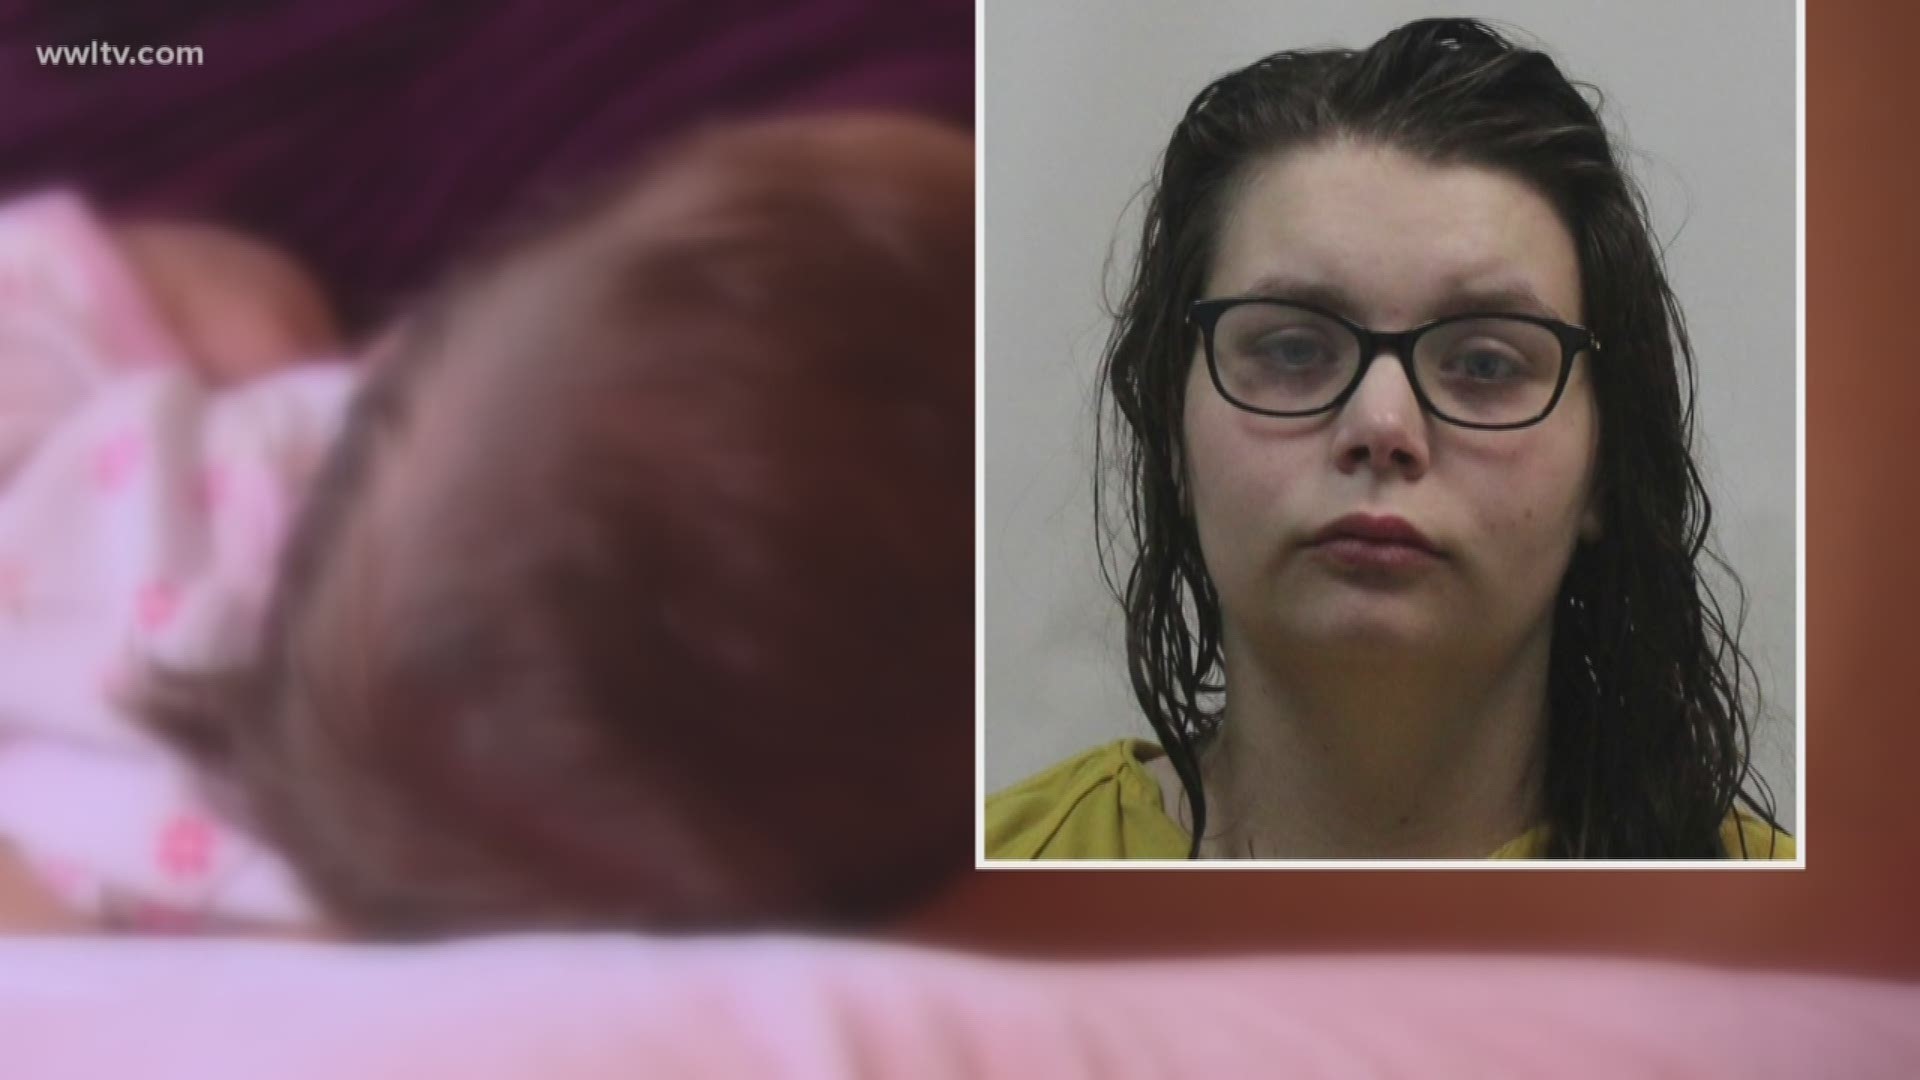 The 22-year-old mother now faces multiple charges and a maximum of 40 years in prison.